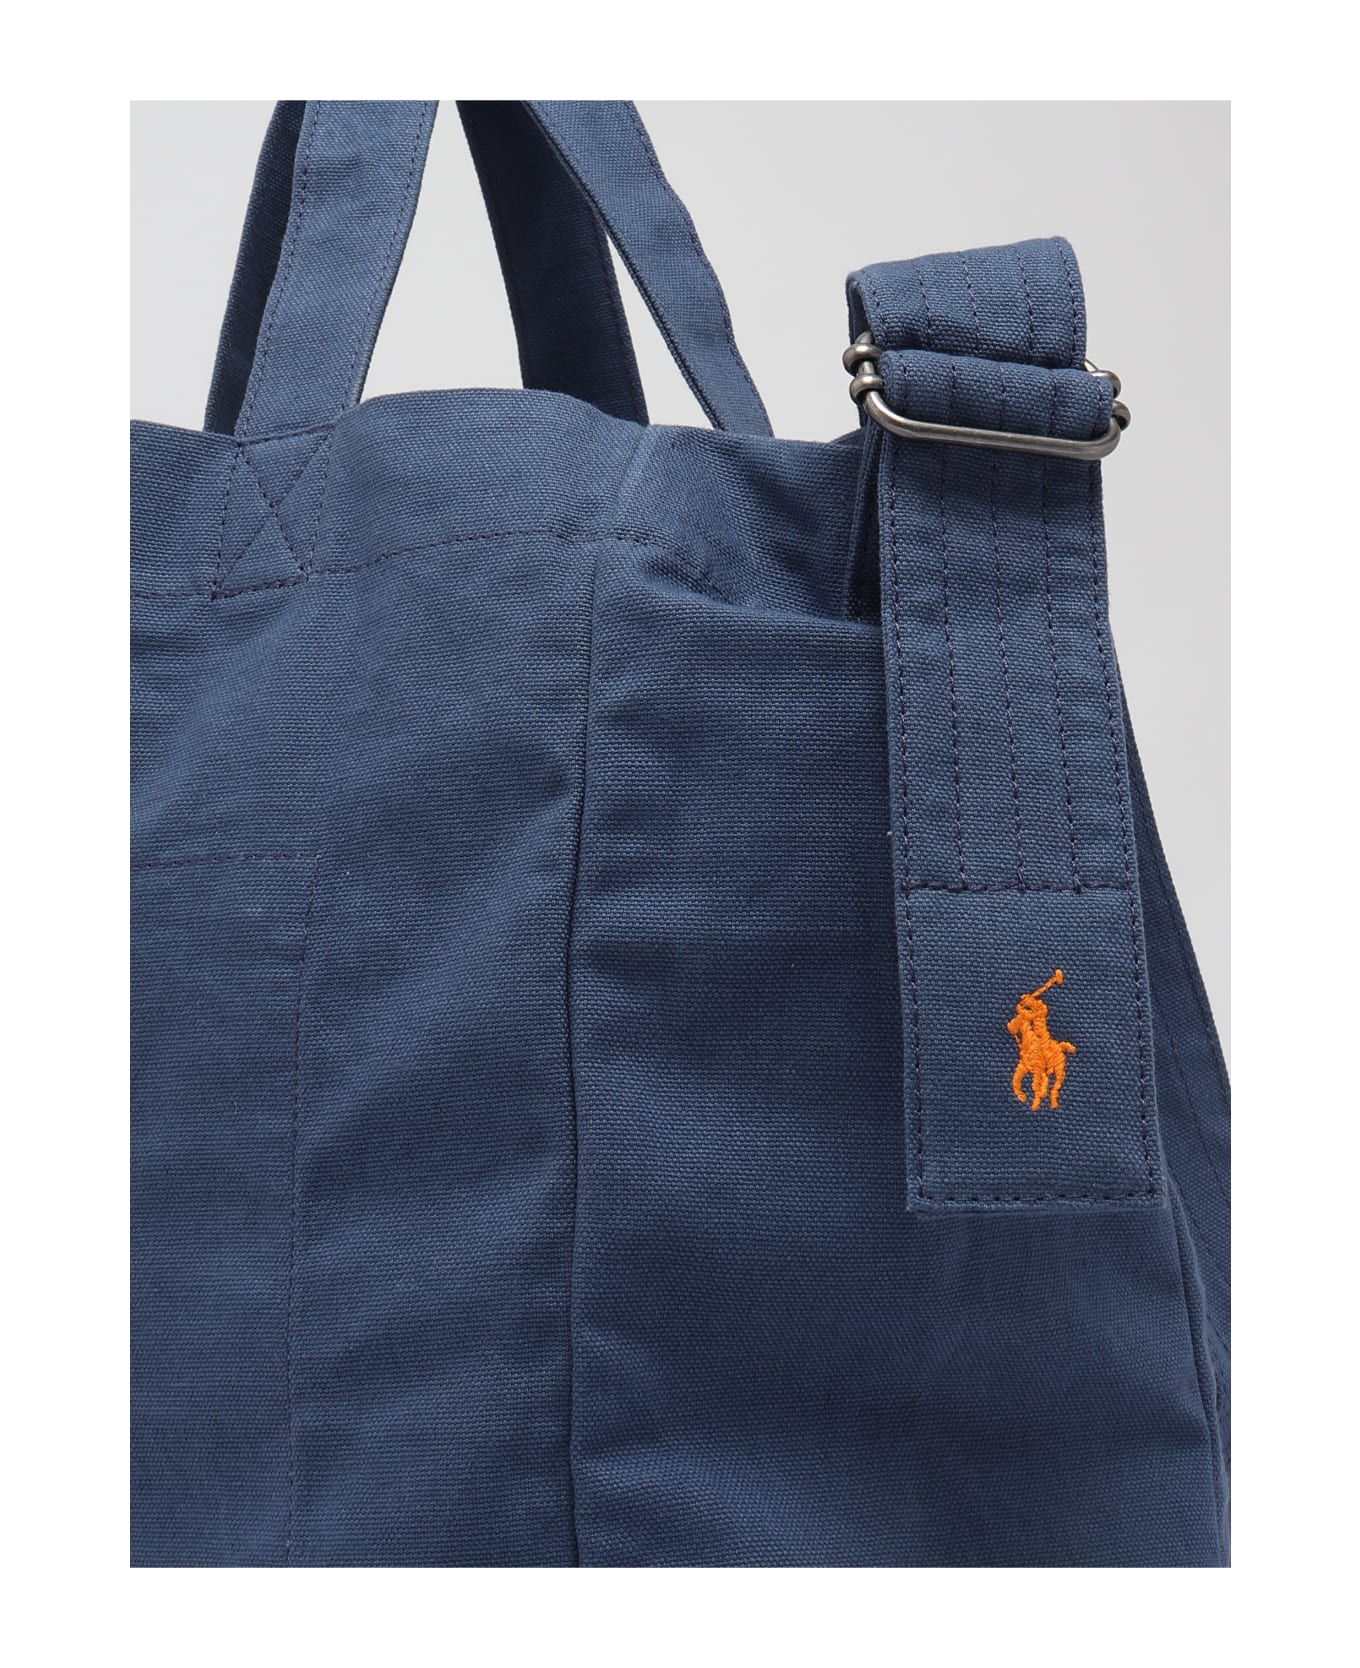 Polo Ralph Lauren Tote Large Canvas Tote - INDACO